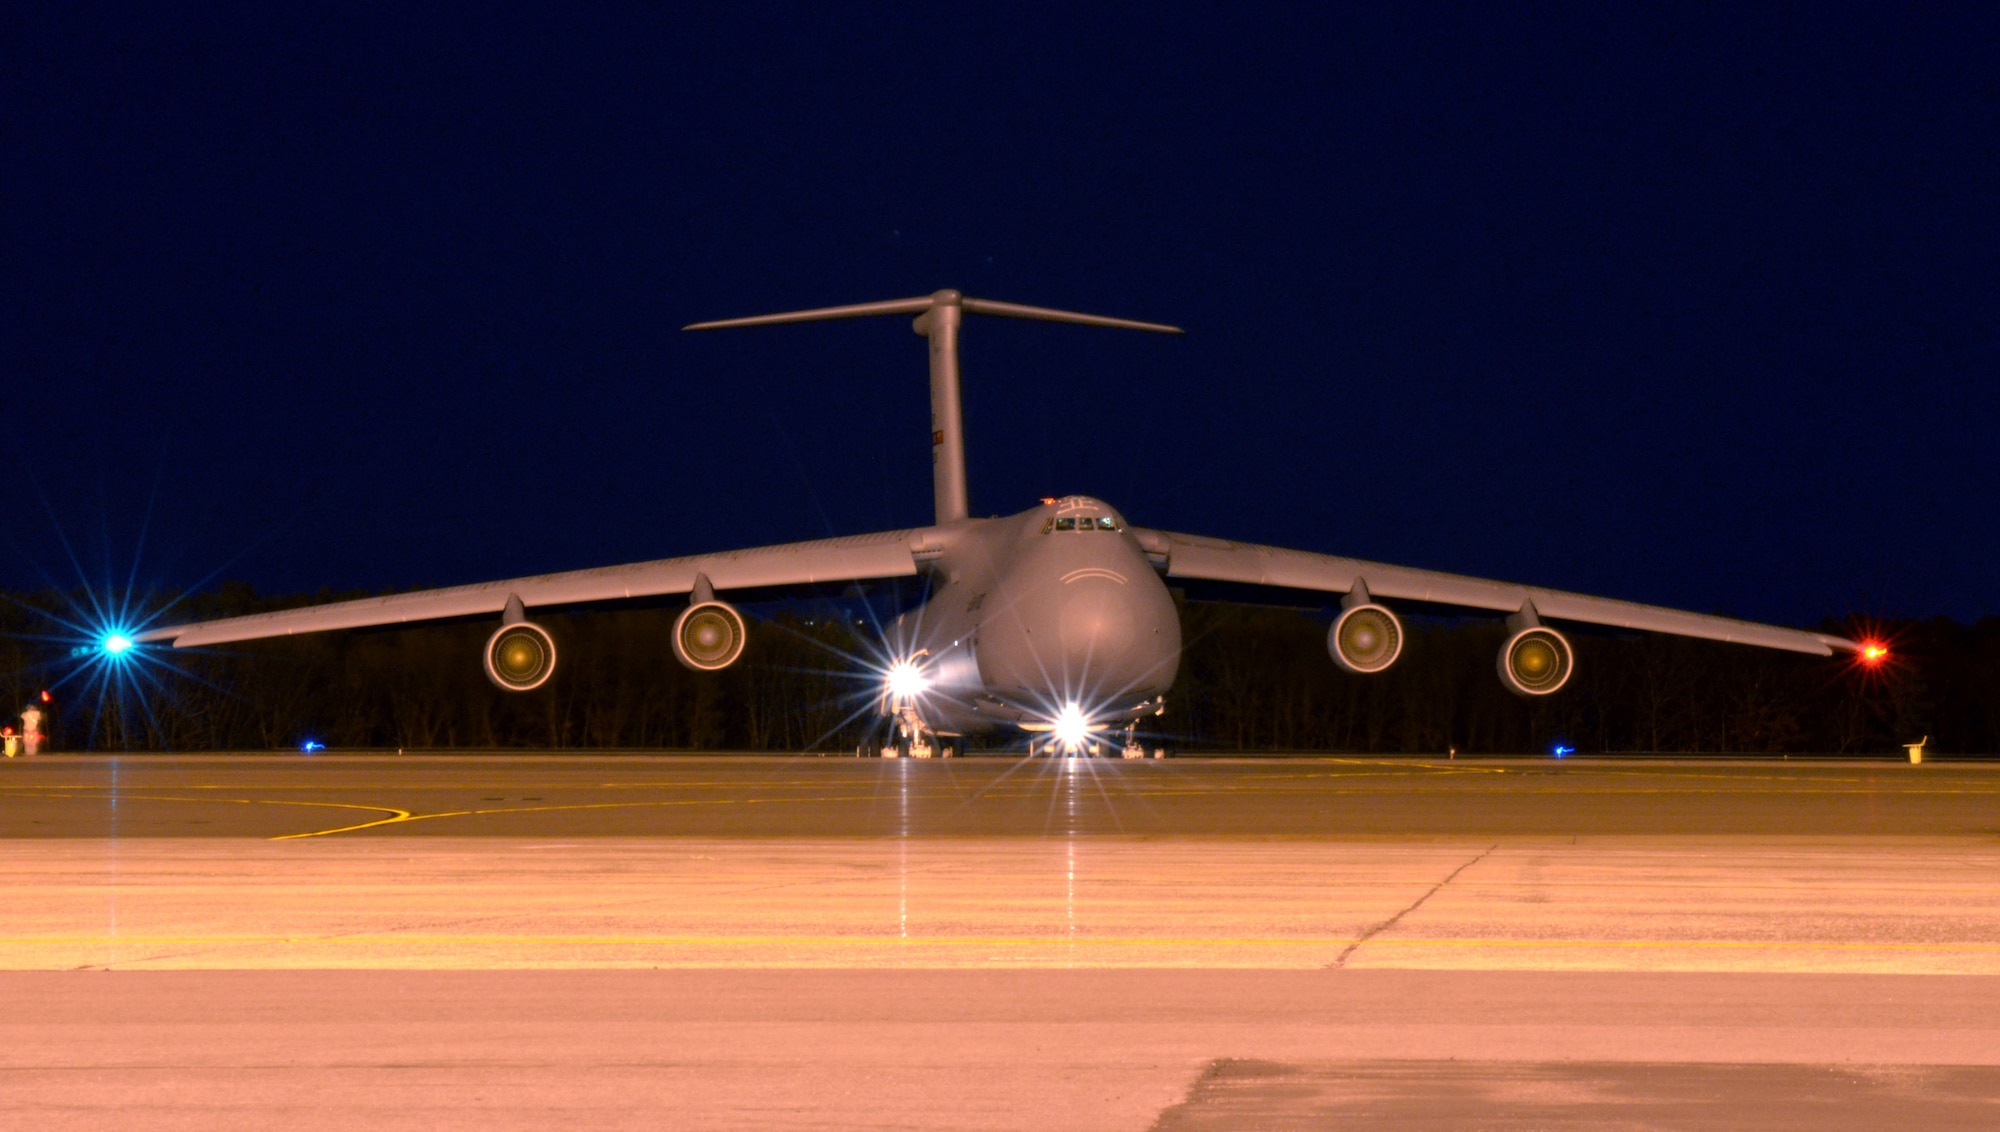 A C-5 Galaxy gives a "light show" just before taxiing out for an evening flight. (U.S. Air Force photo/SrA. Kelly Galloway)